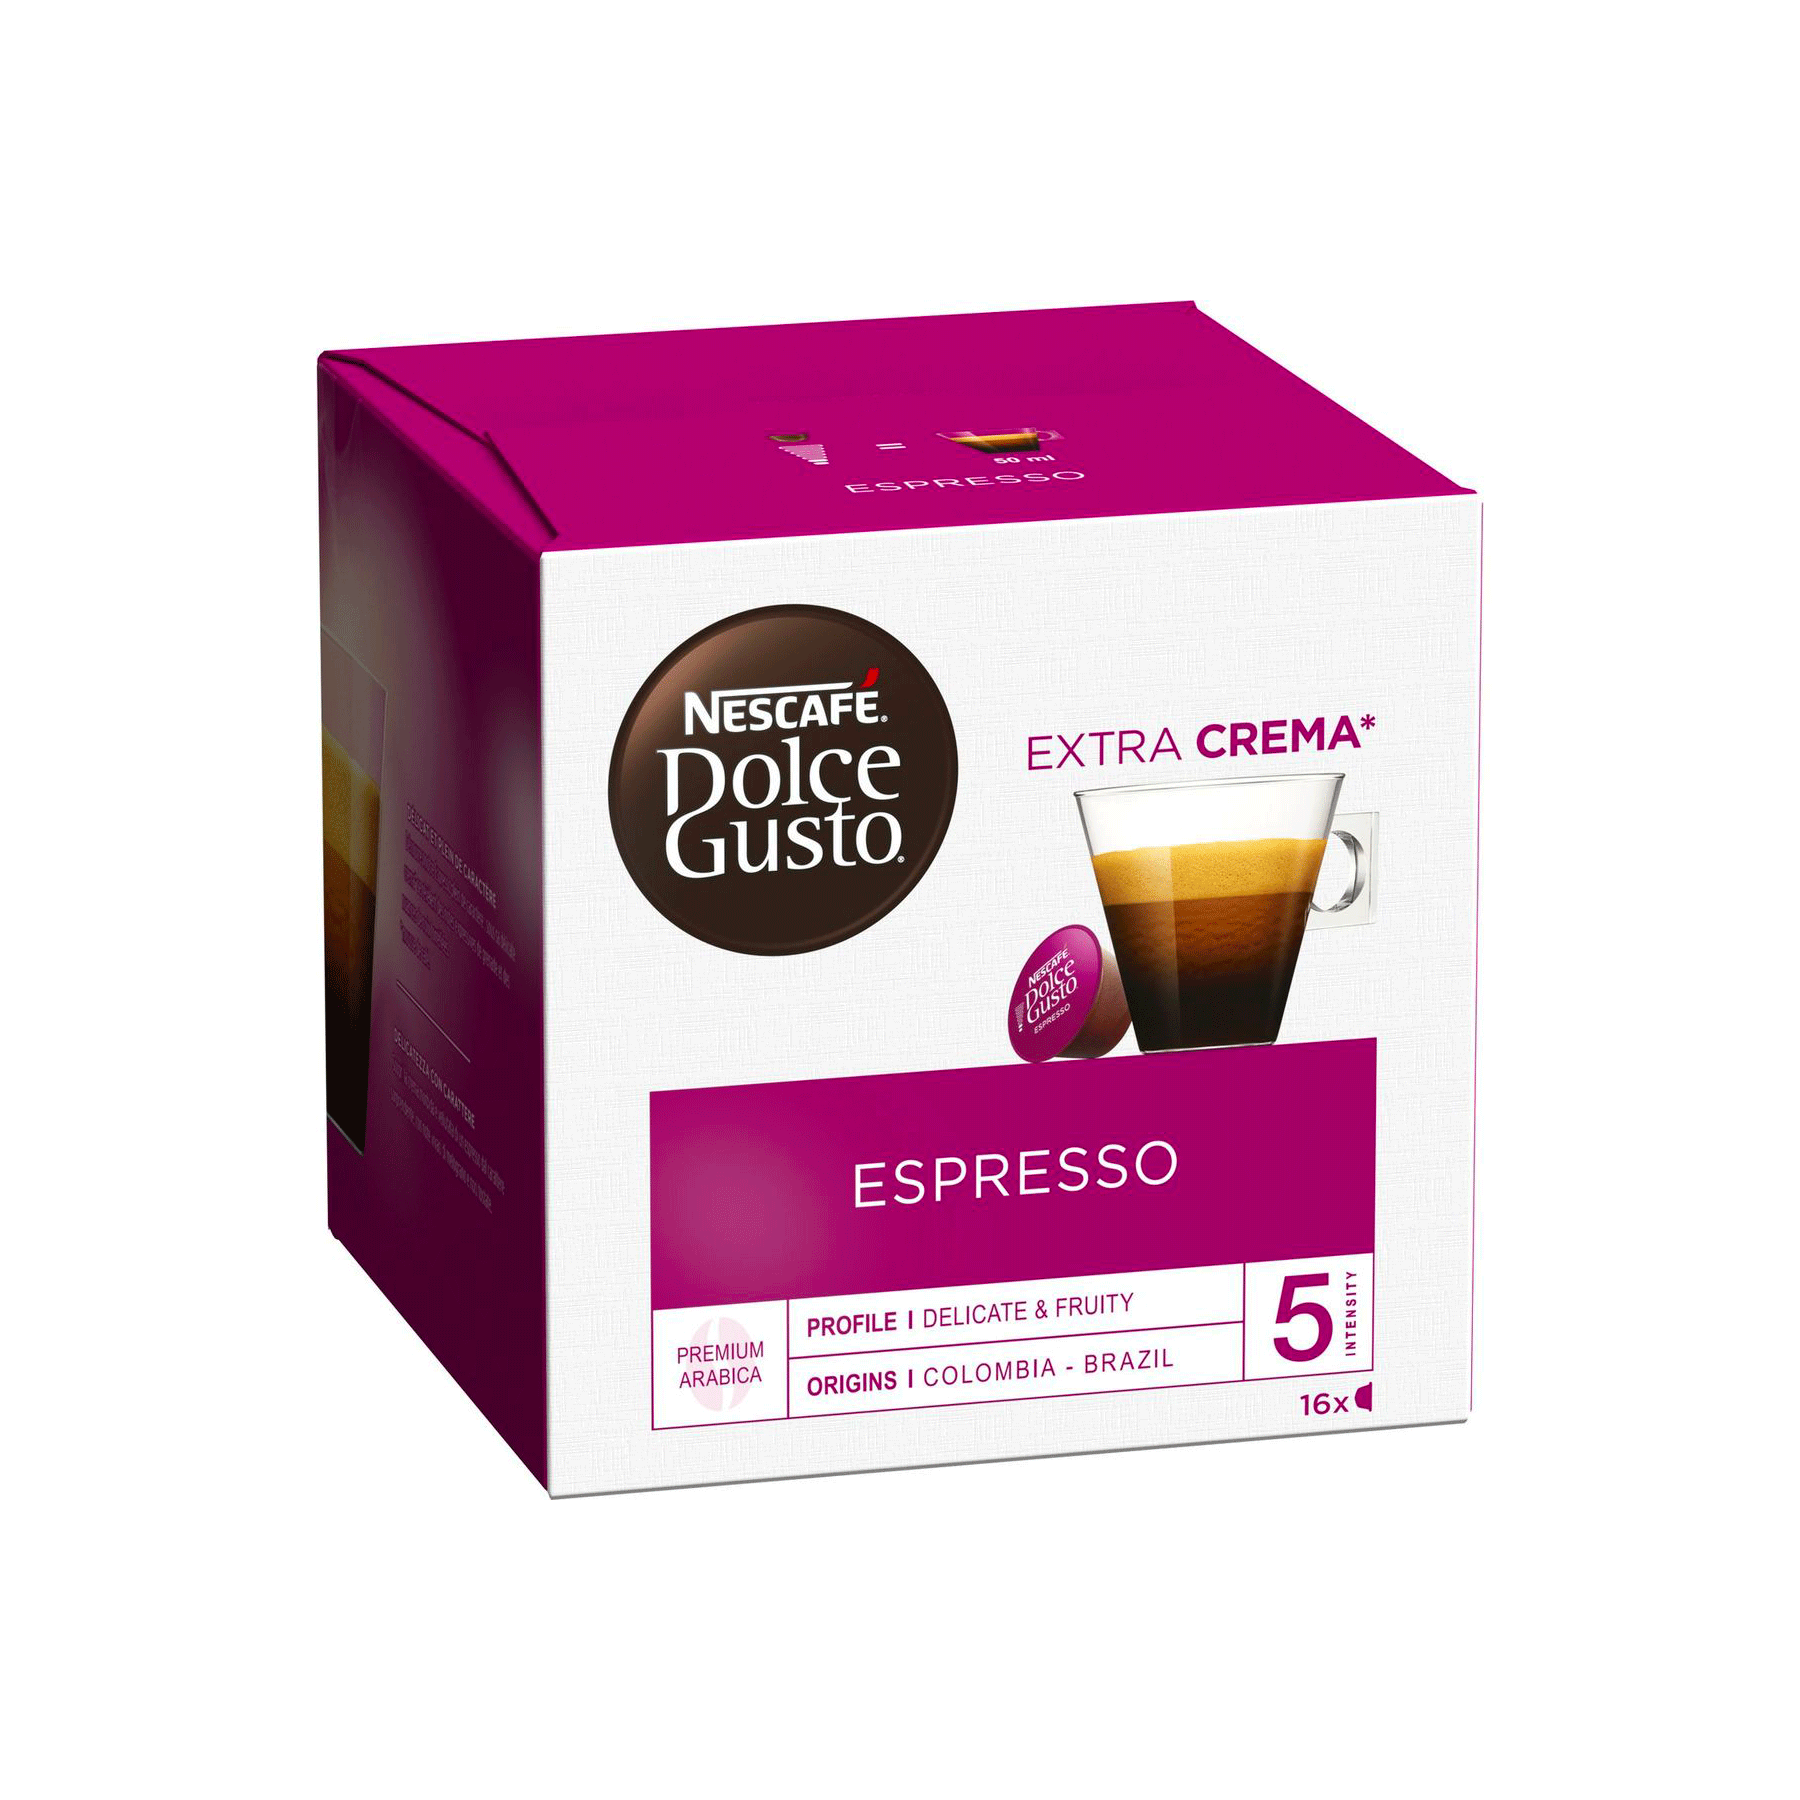 Espresso dolce. Dolce gusto капсулы Espresso. Капсулы Nescafe Dolce gusto эспрессо 88гр. Капсулы Nescafe Dolce gusto grande 30шт. Nescafe Dolce gusto Coffee Capsules gusto Flat White 16 PCS.